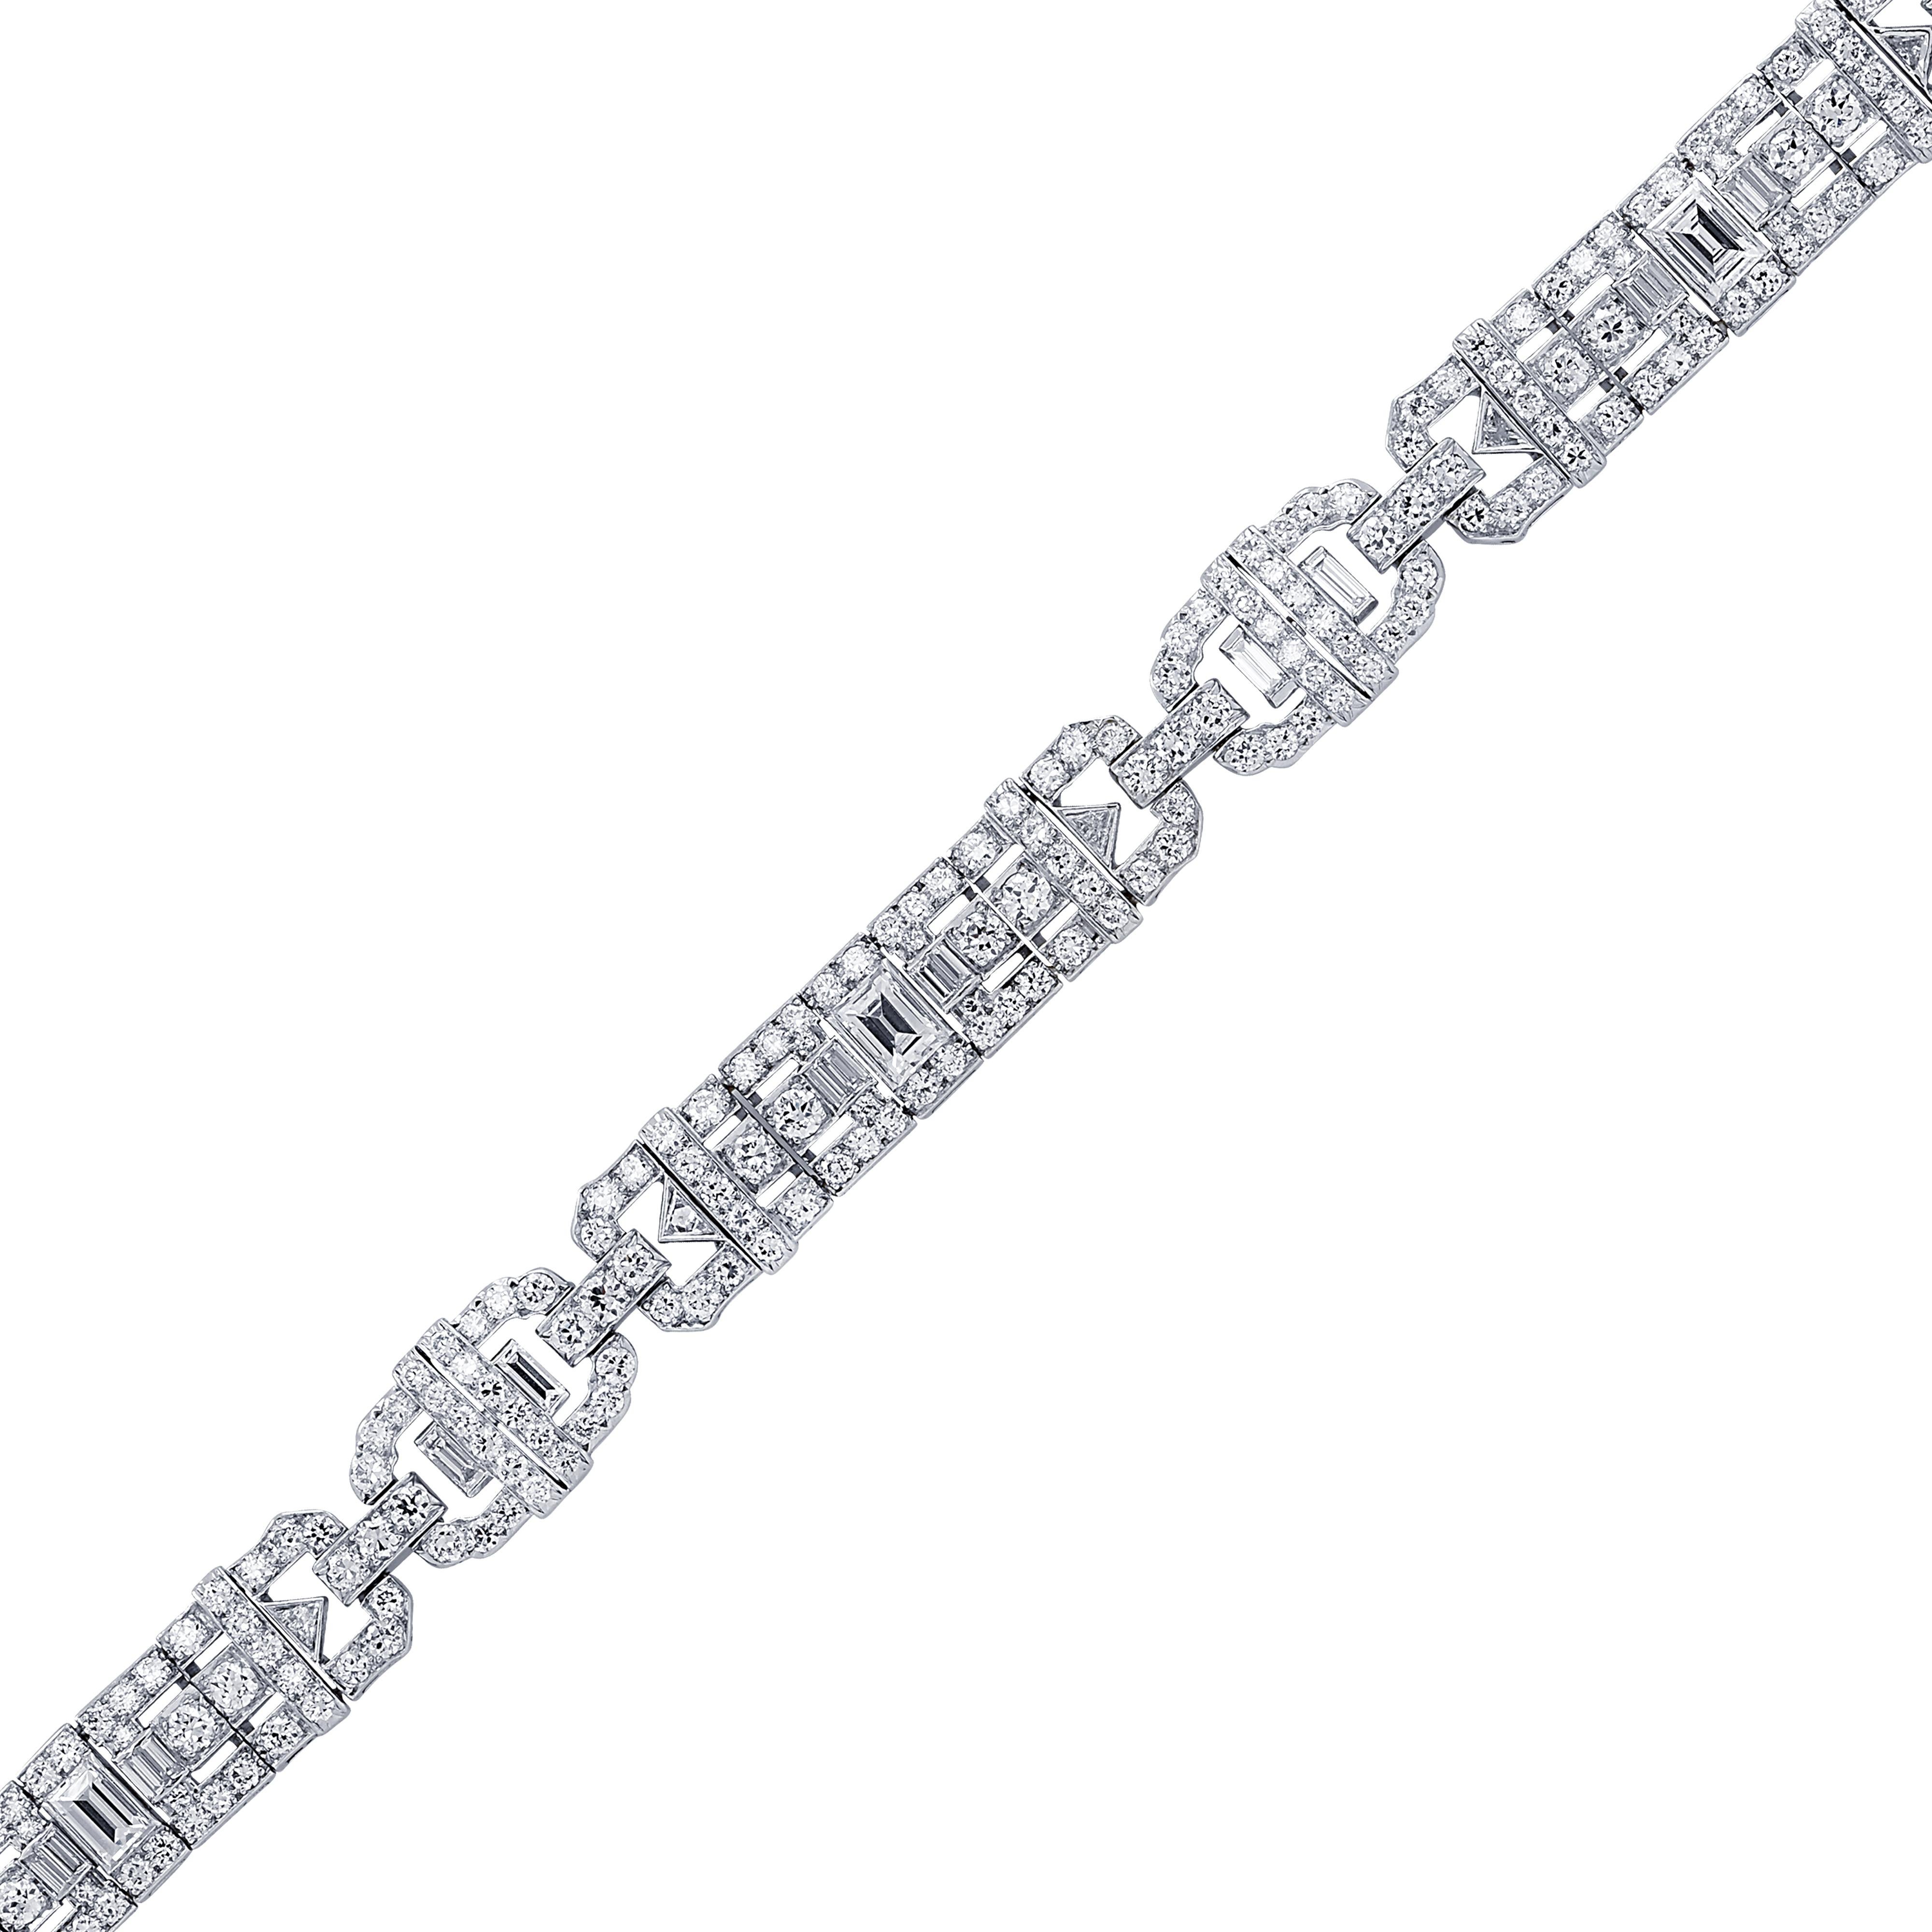 Gorgeous Art Deco bracelet crafted in platinum featuring 267 Old European, baguette, and trillion cut diamonds weighing approximately 10.0 carat total weight. The diamonds are graded G color and VS clarity. The bracelet measures 7.5 inches in